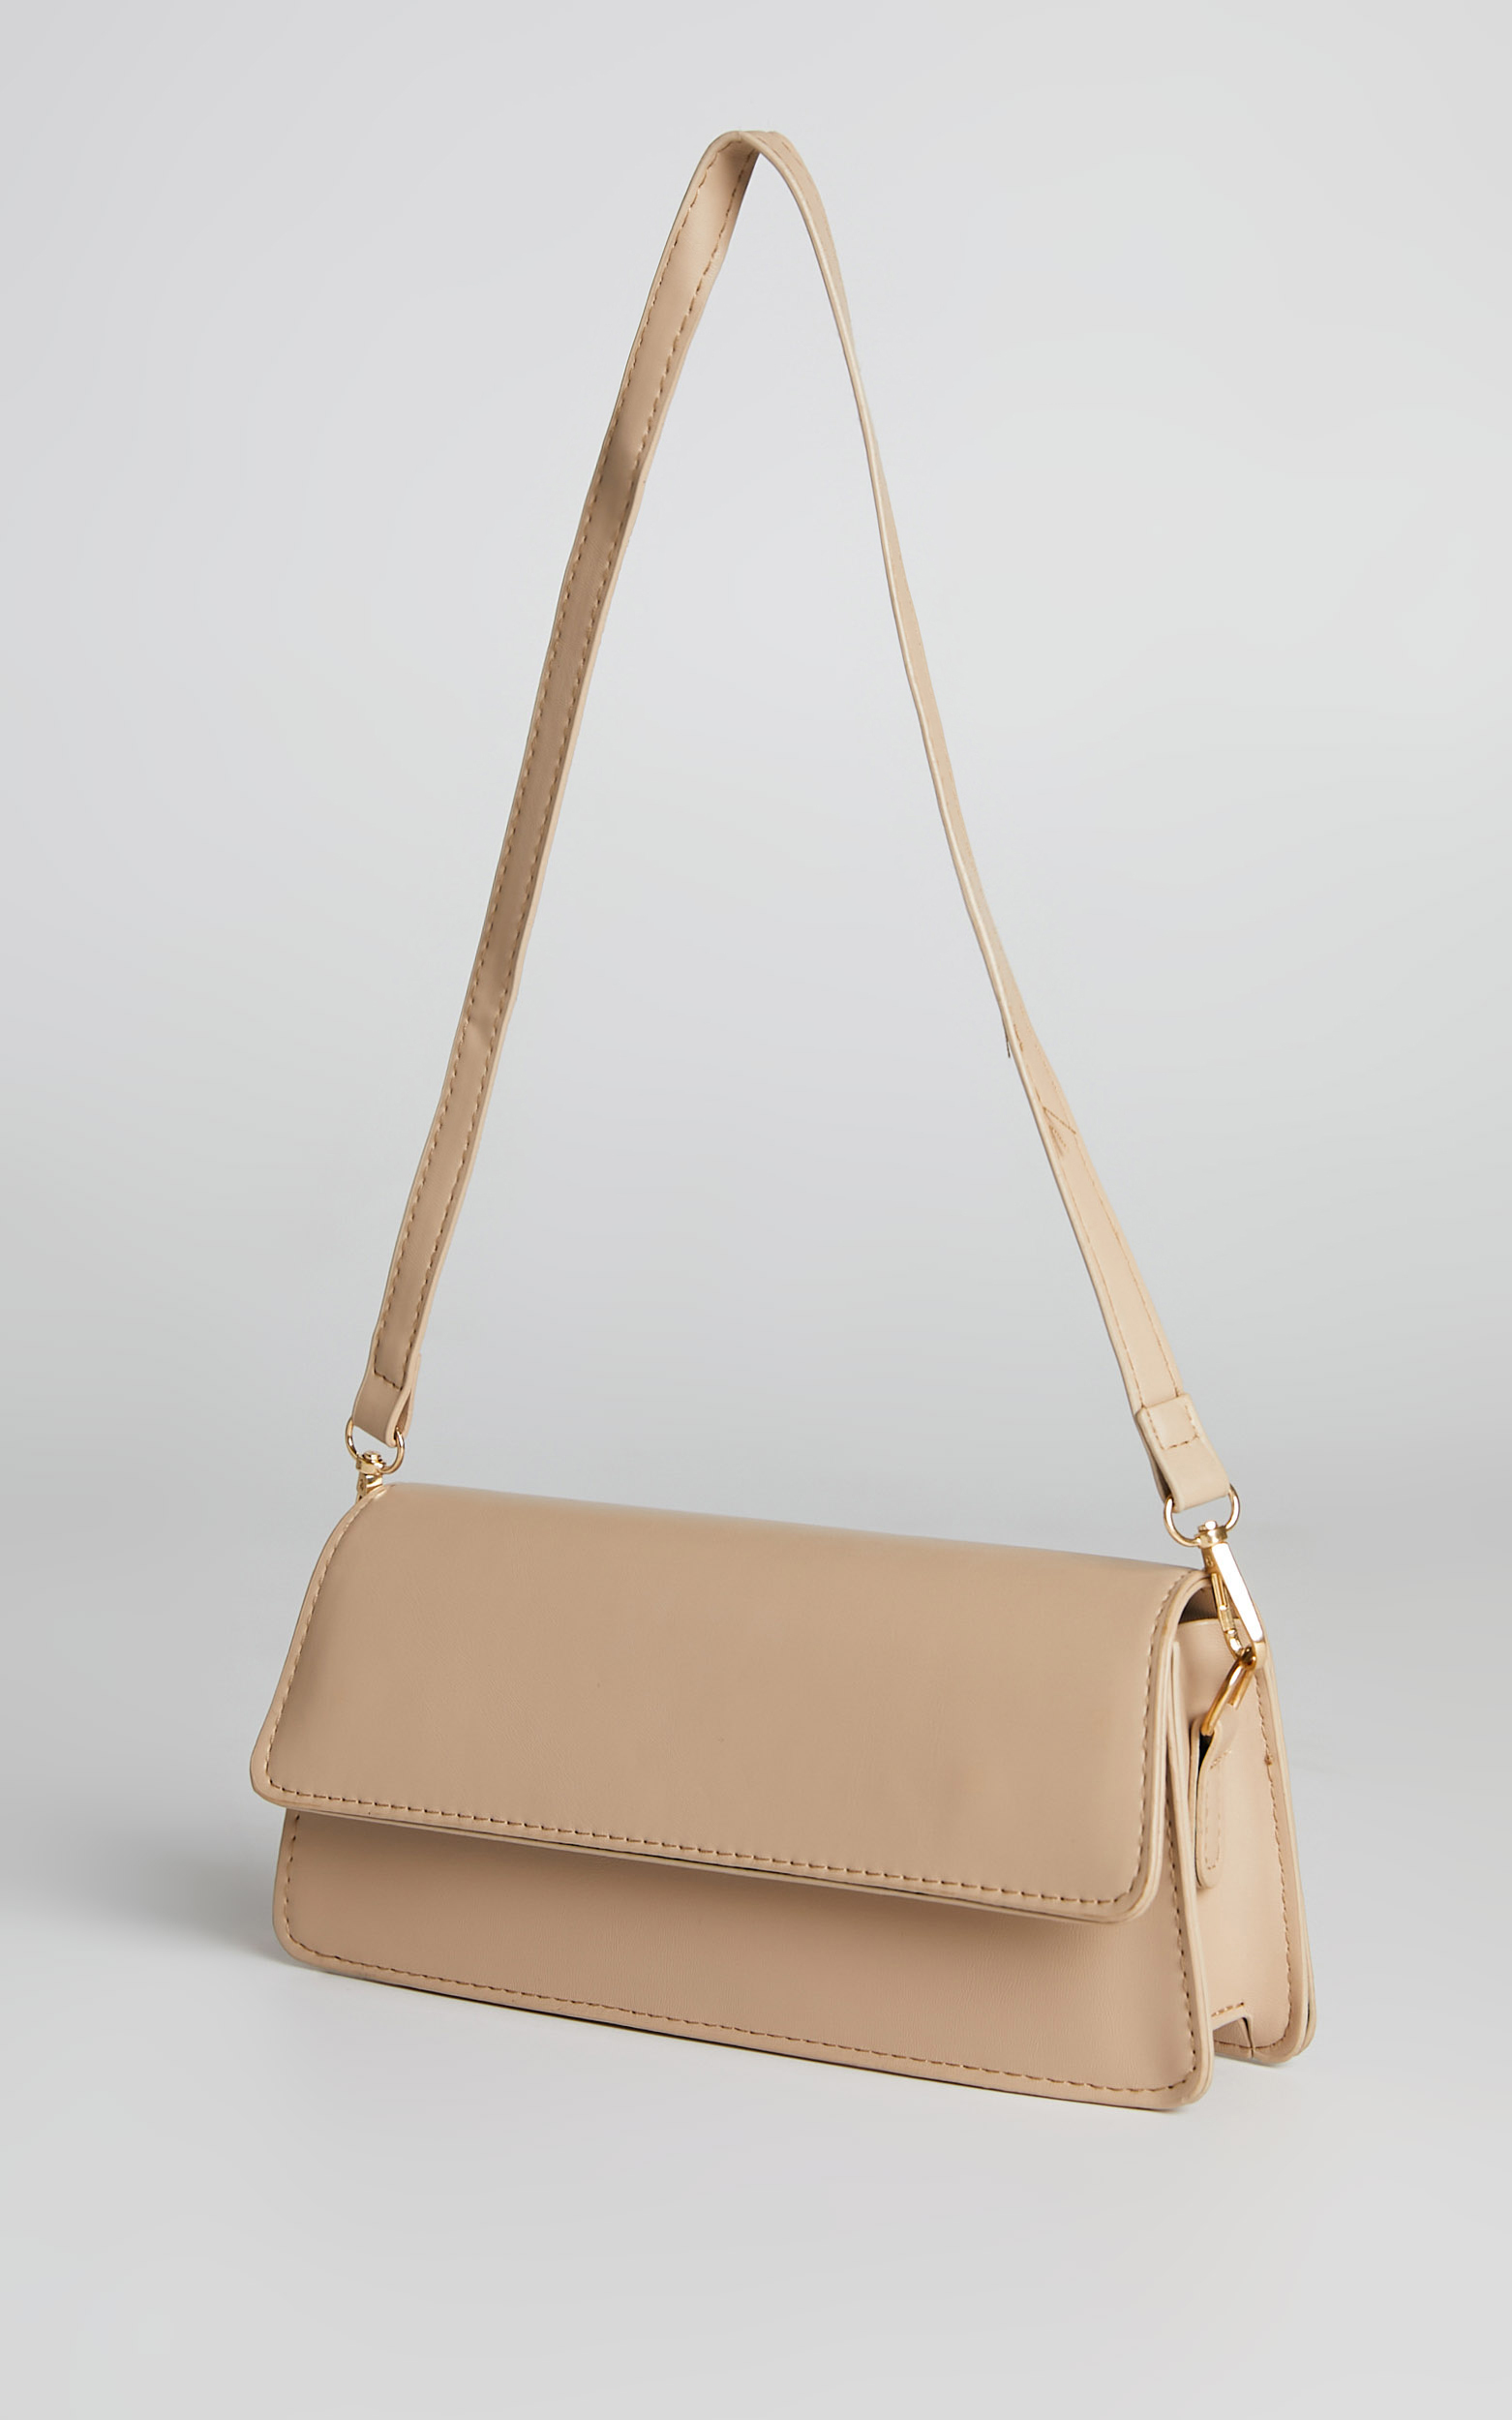 Pip Crossbody Bag in Nude - NoSize, BRN2, hi-res image number null